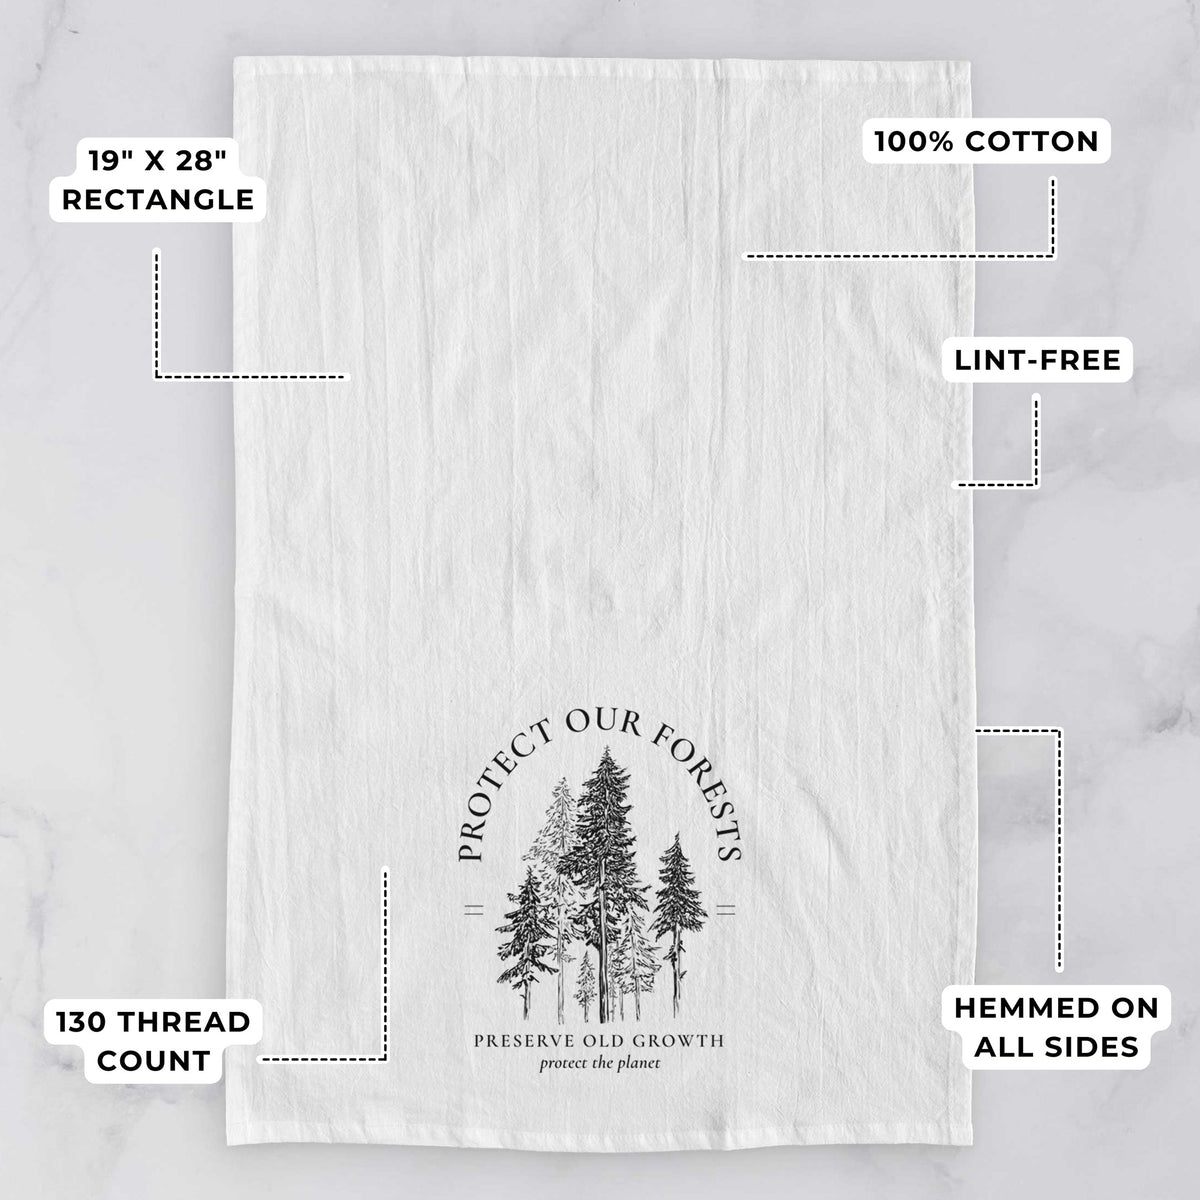 Protect our Forests - Preserve Old Growth Tea Towel